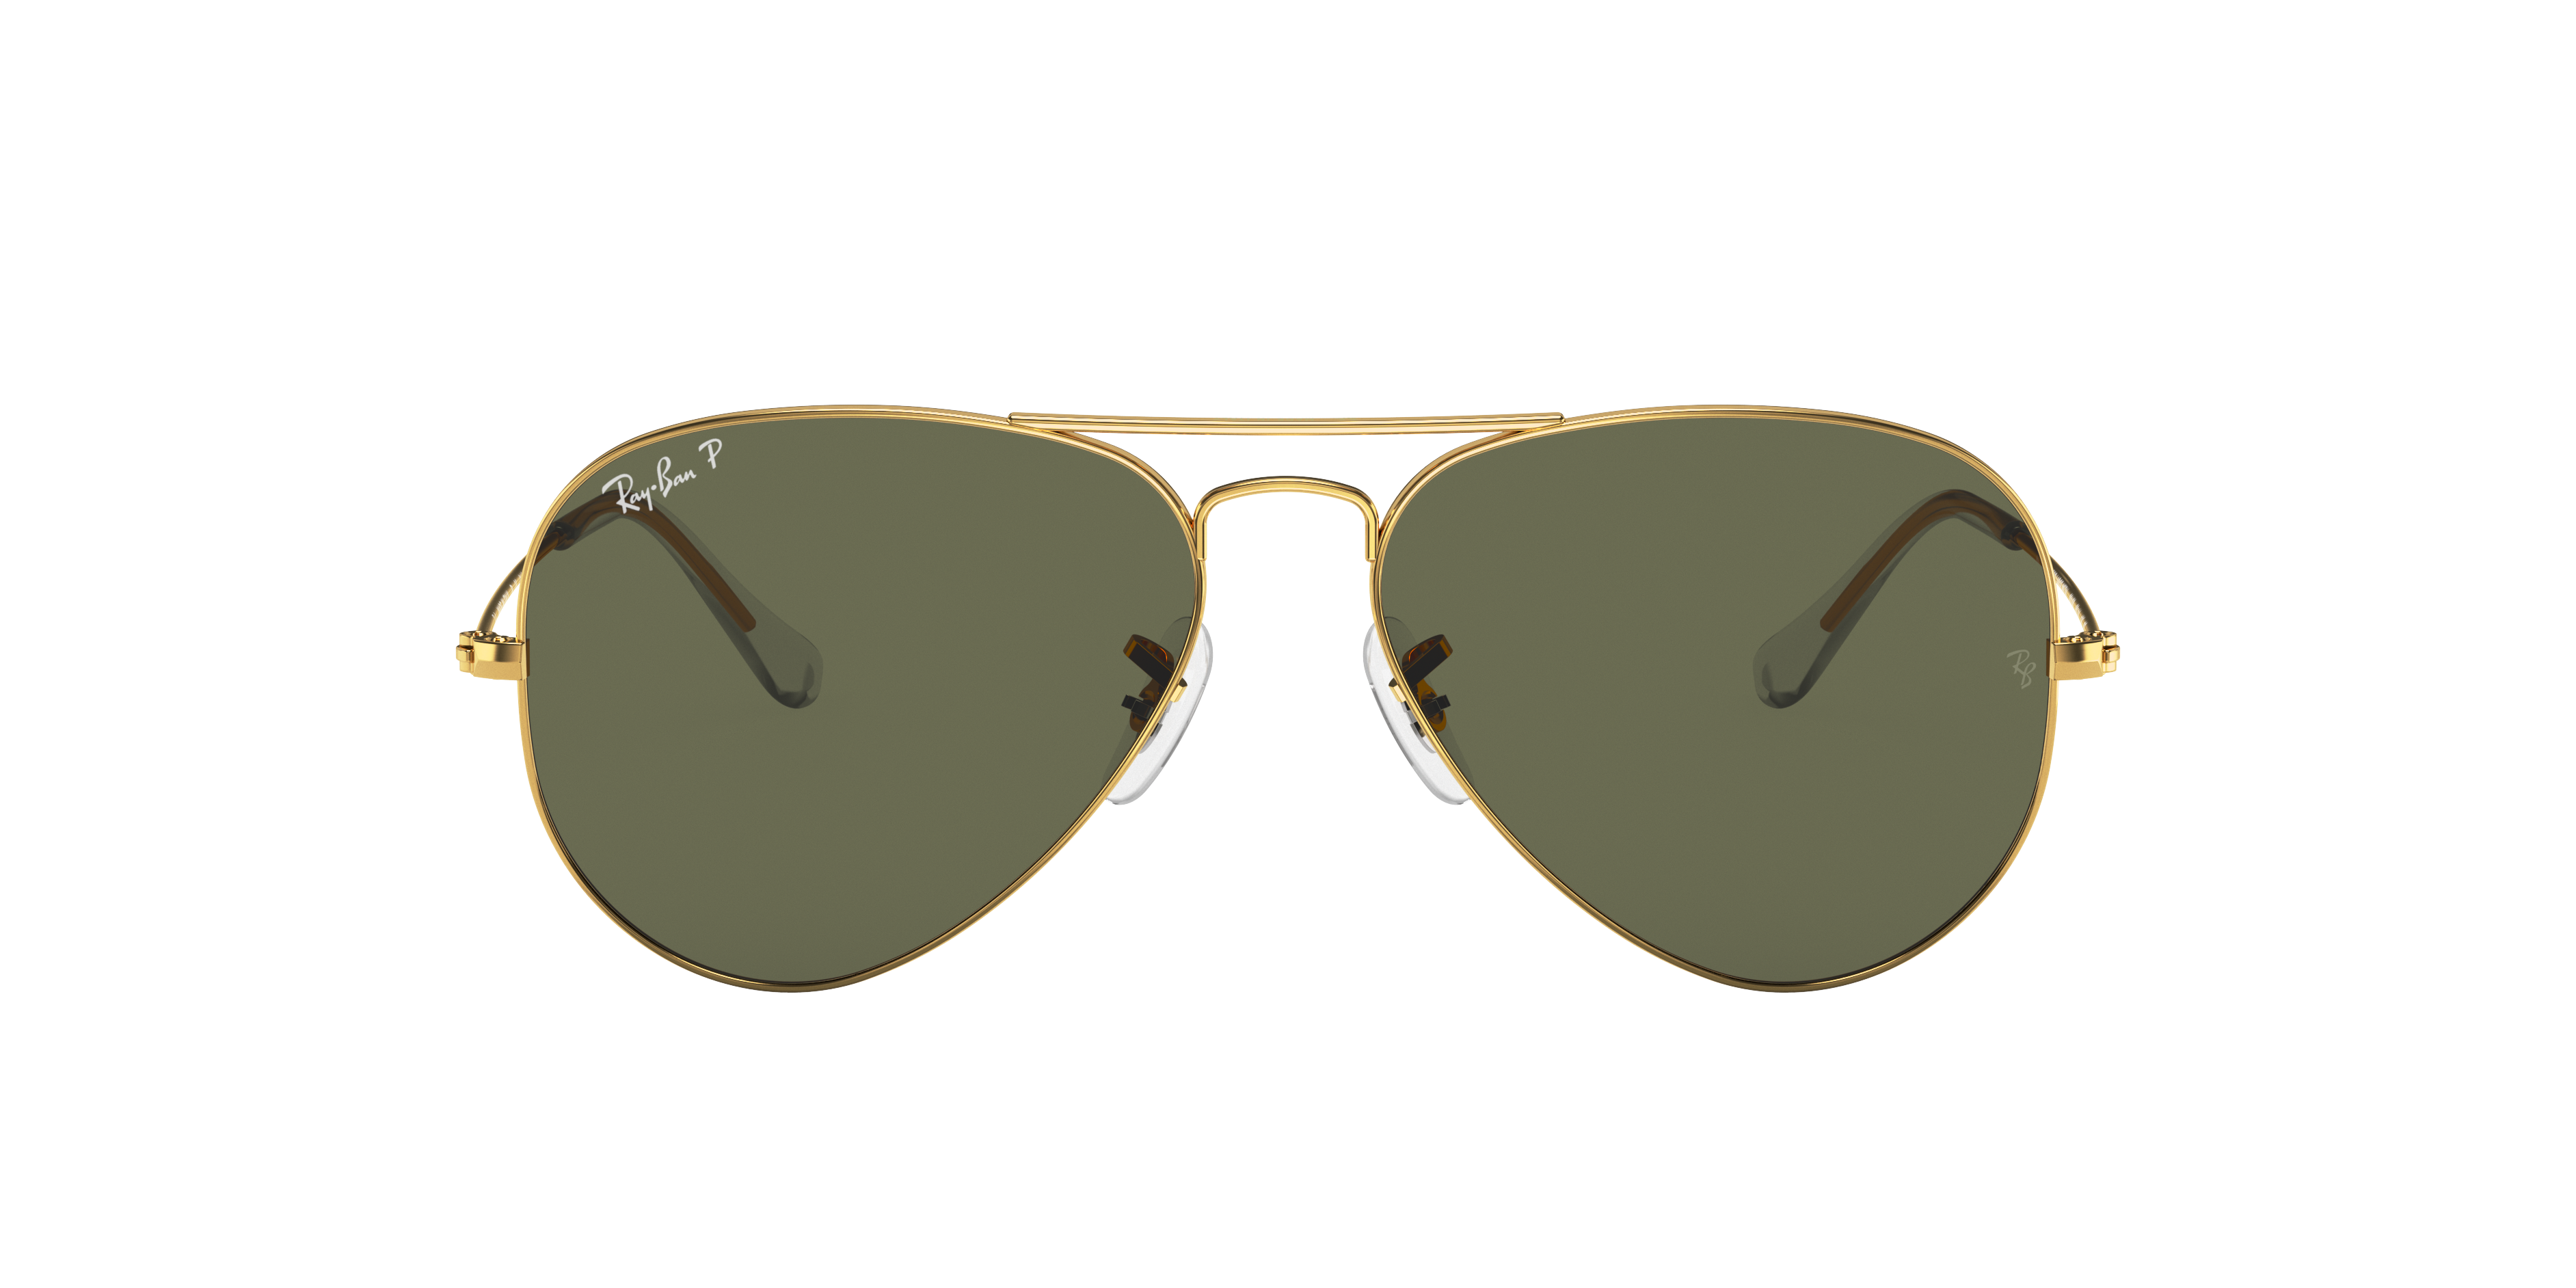 luxottica ray ban replacement lenses